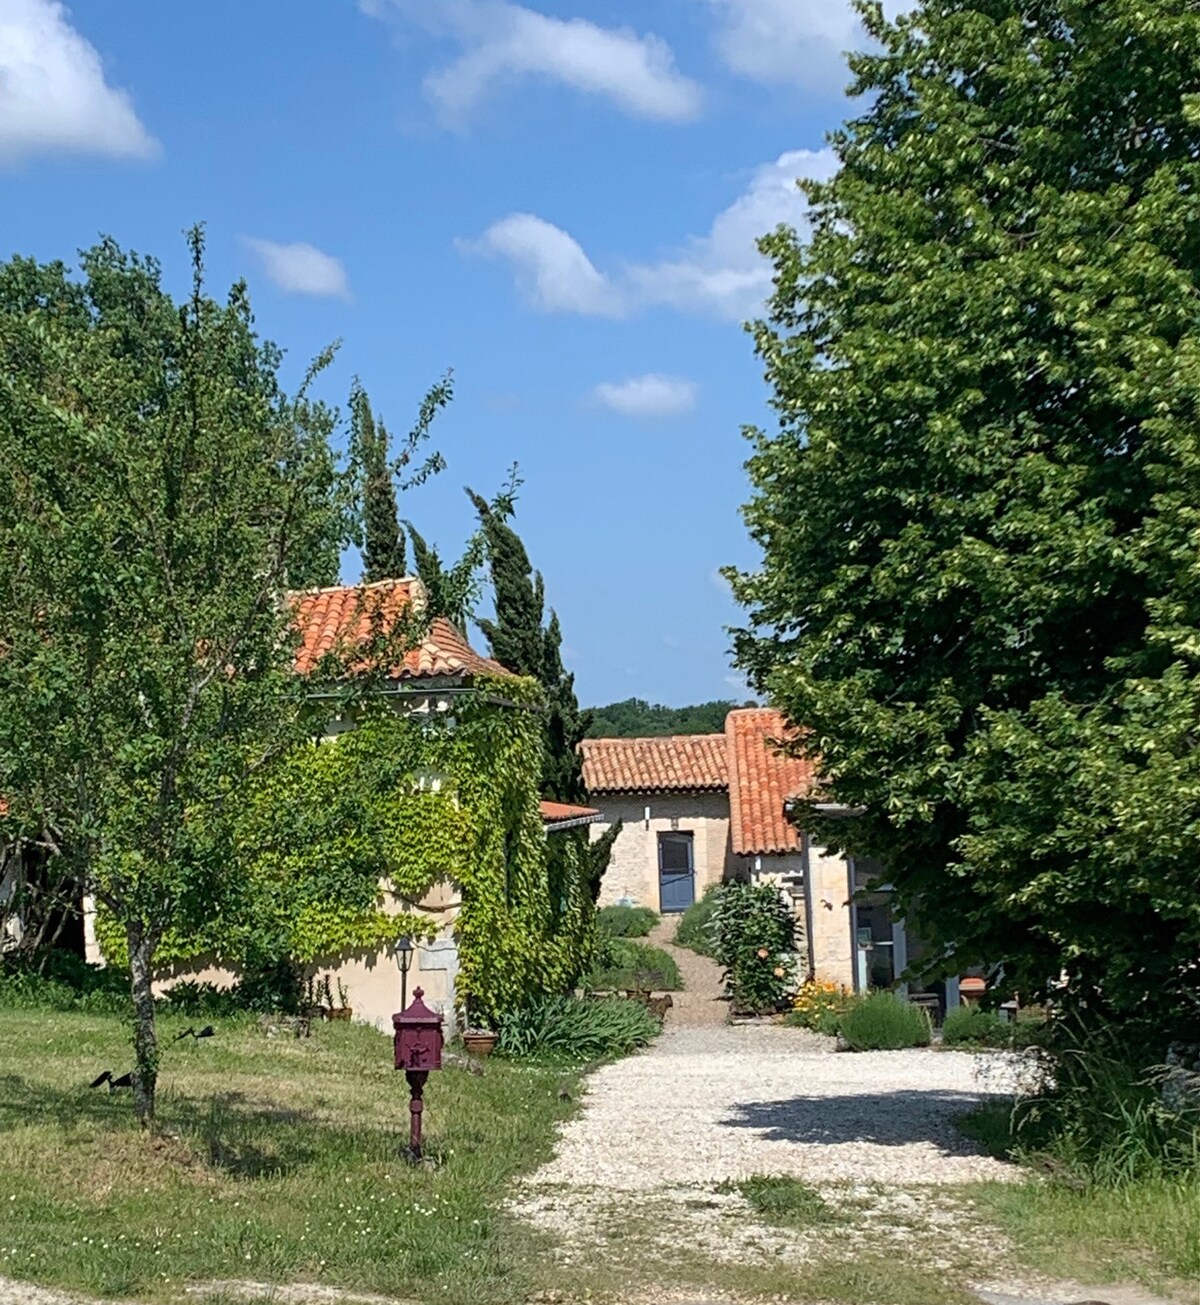 Private hamlet with pool in beautiful countryside.